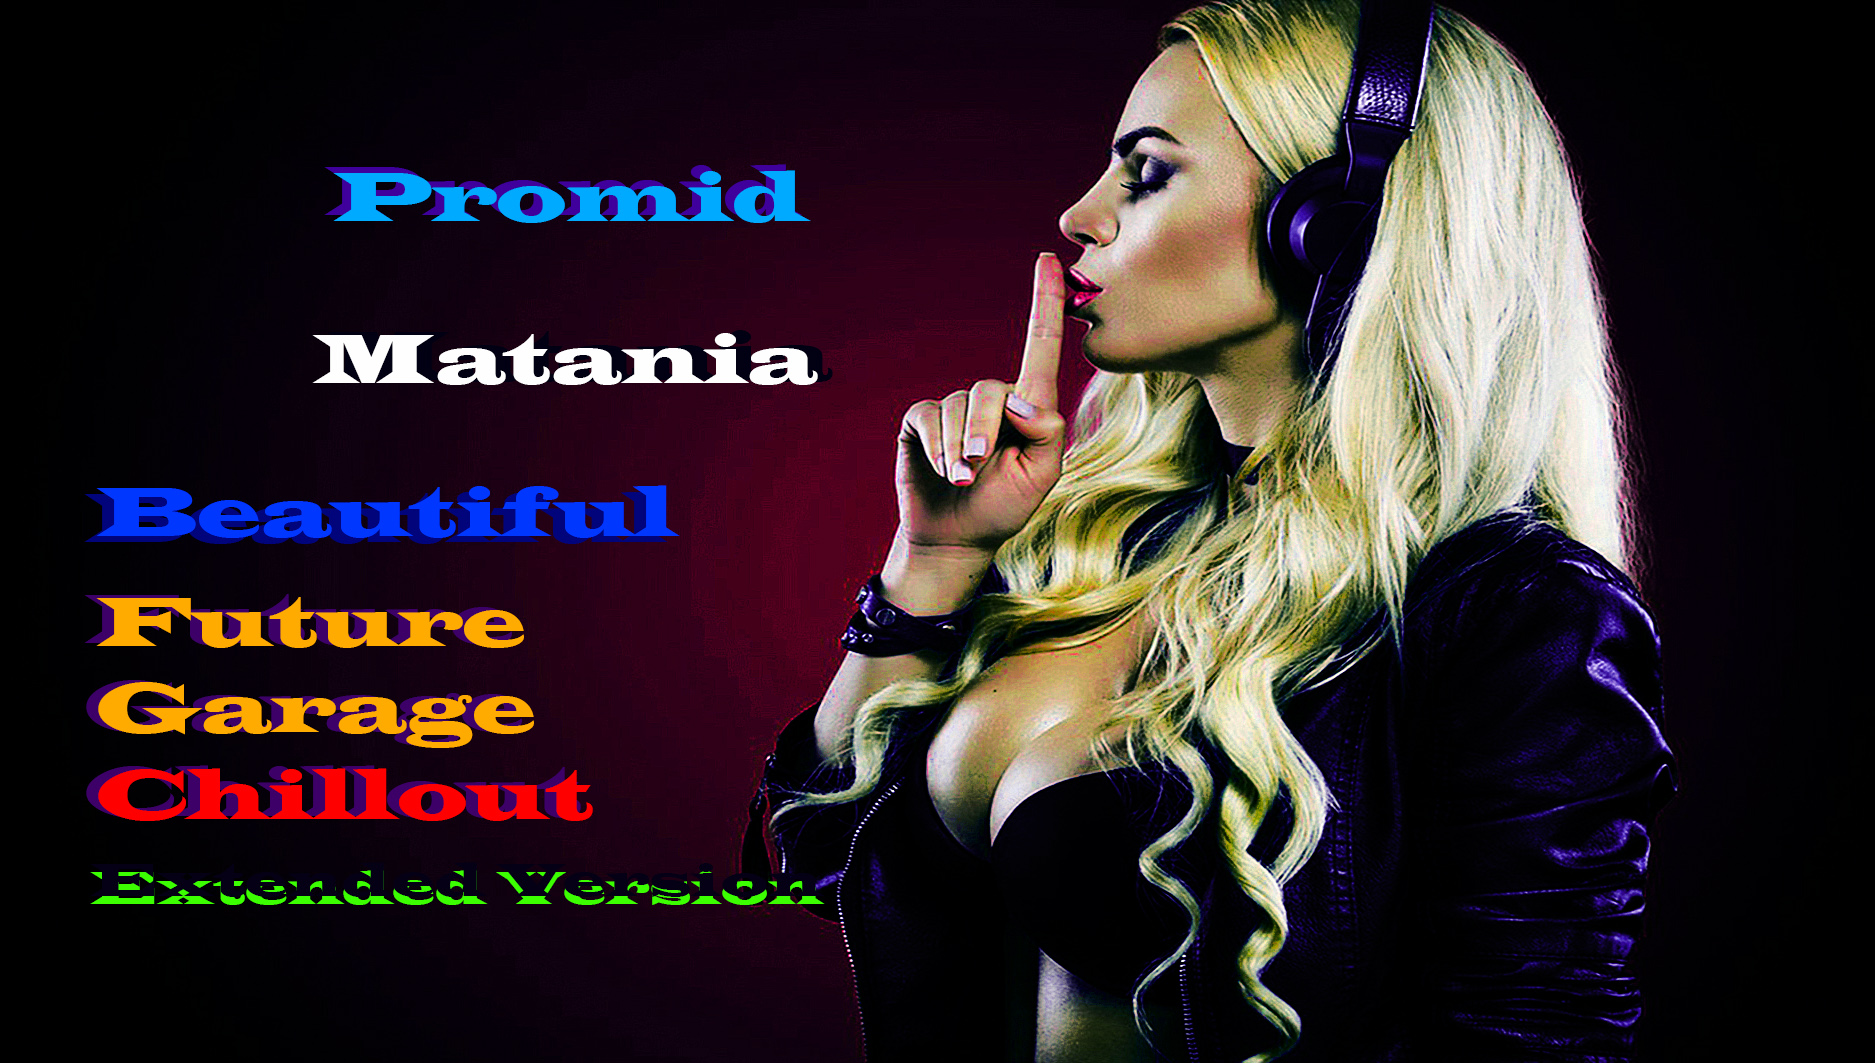 Promid - Matania ( Beautiful Future Garage, Chillout, Extended Version, Relax ) Красивый Чилаут .mp4